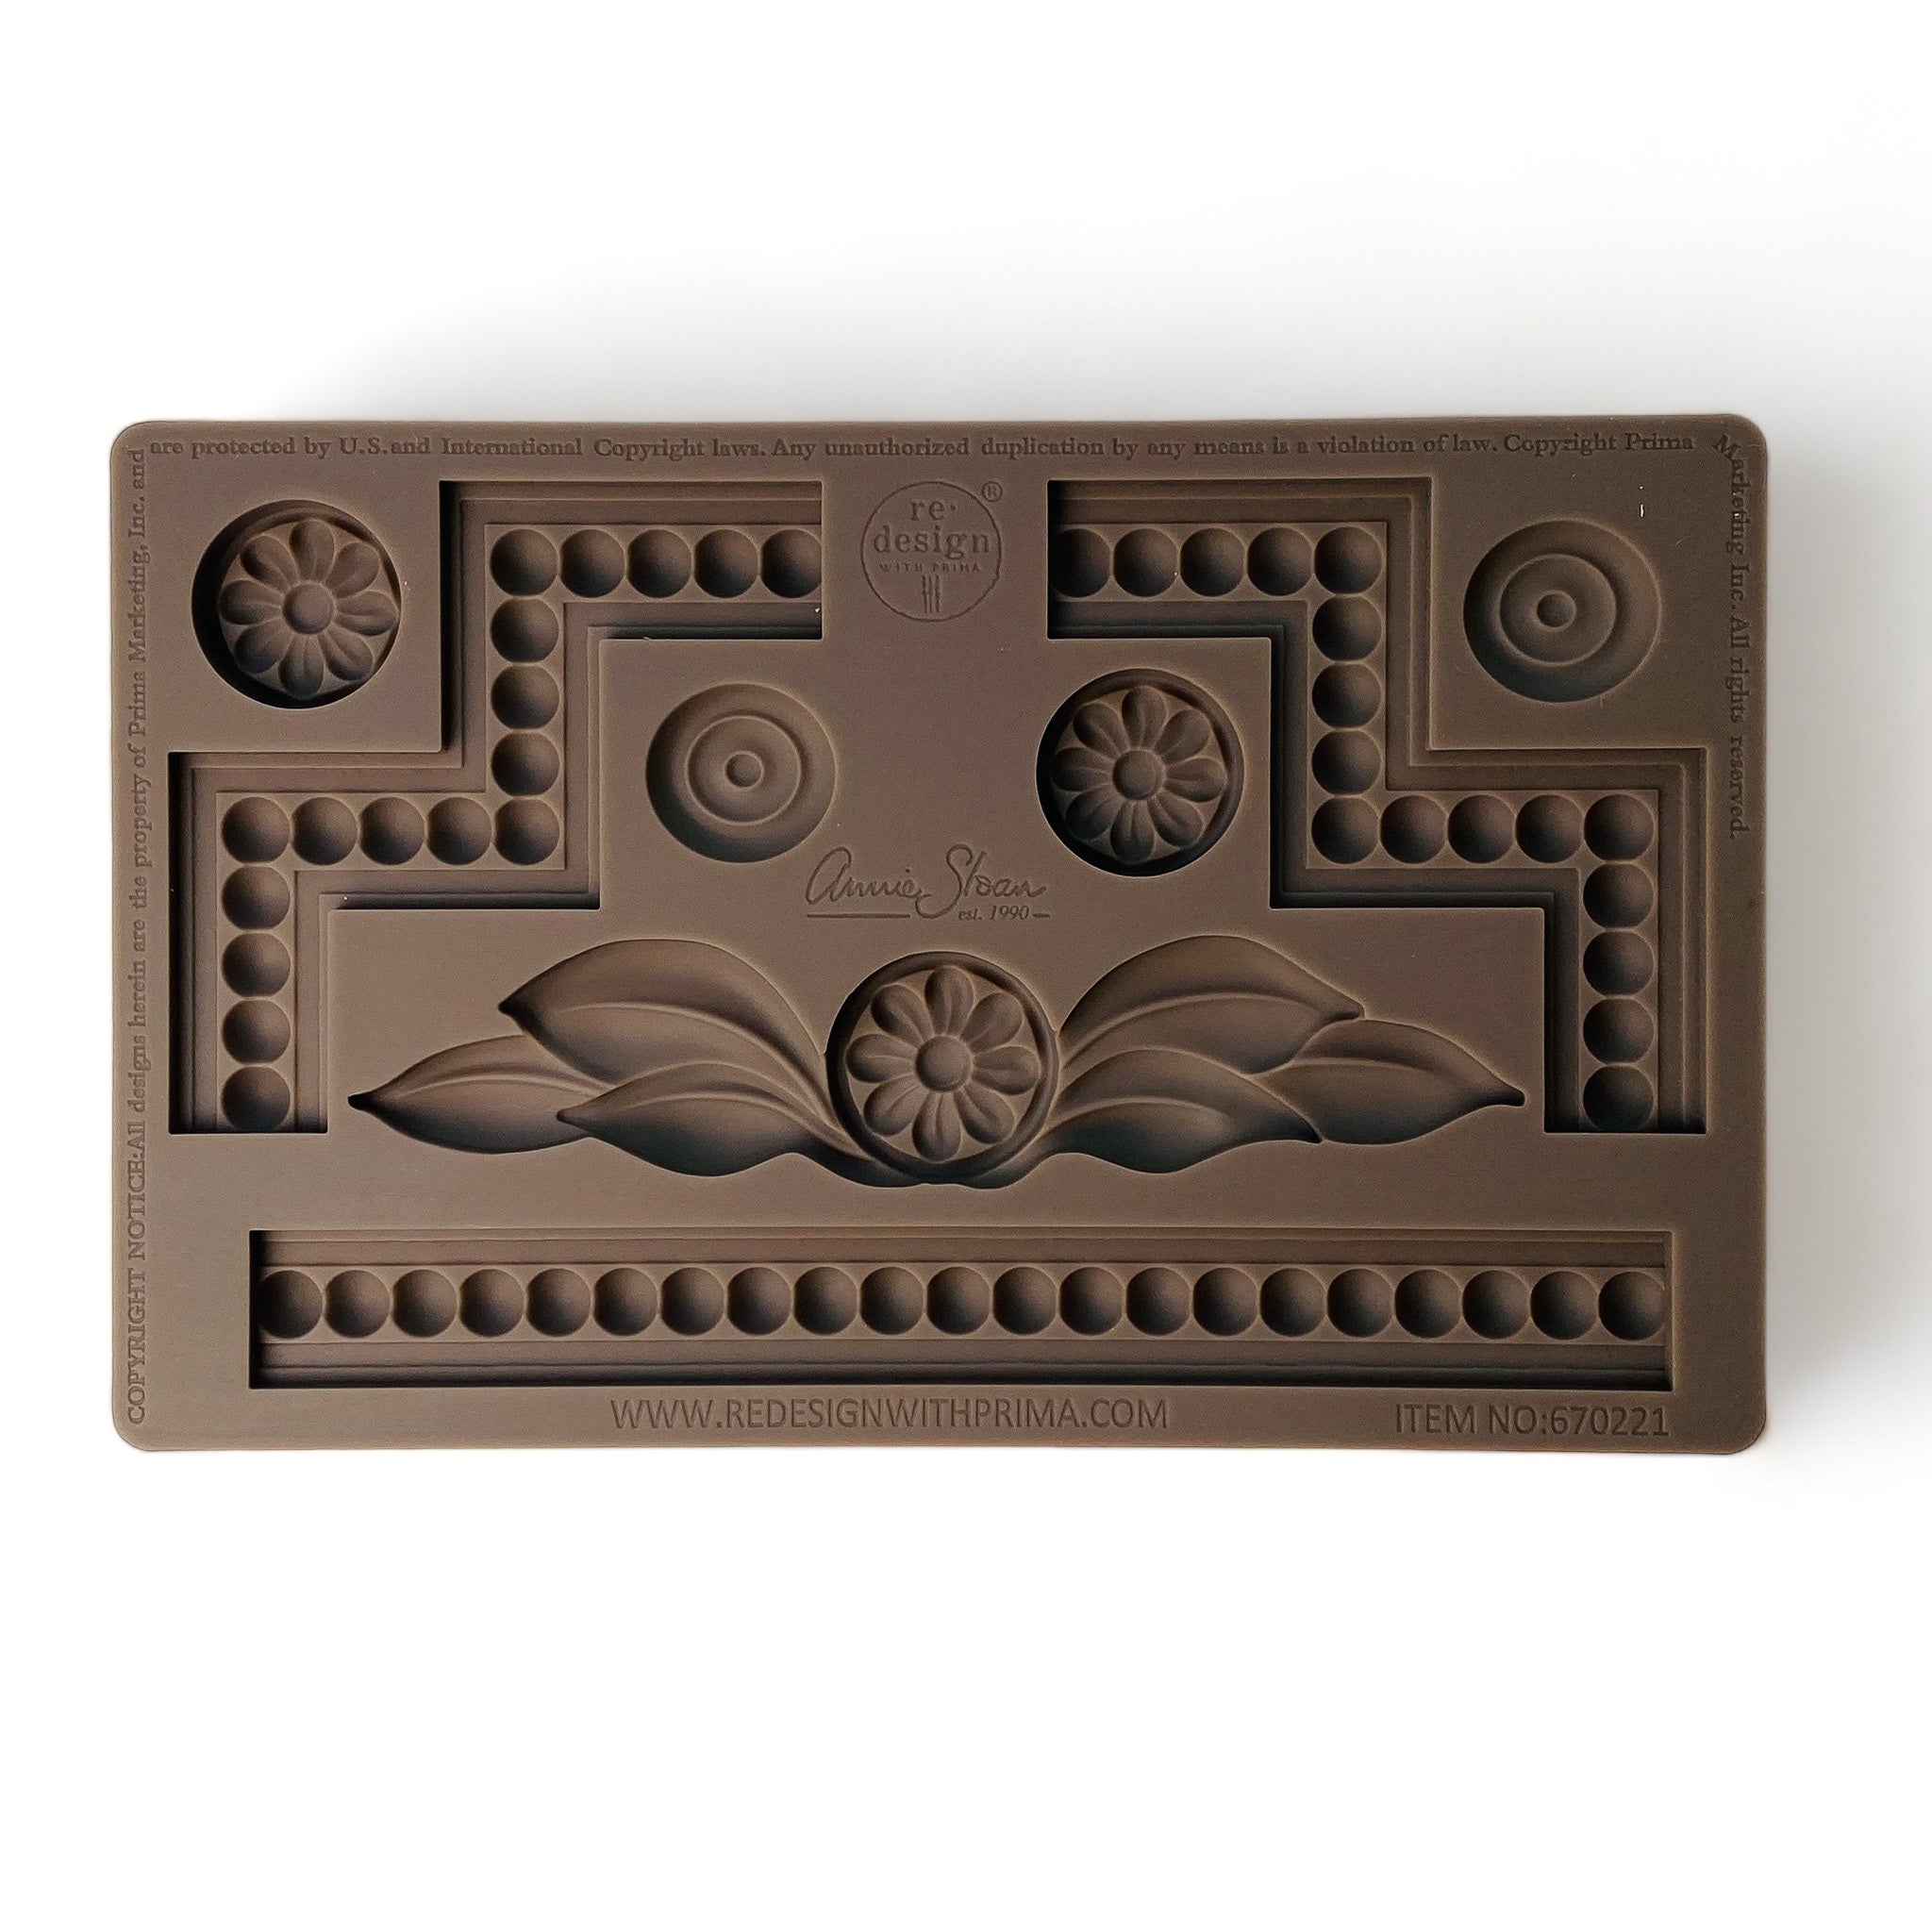 A brown silicone mold featuring unique edge pieces, borders, and multiple small floral medallions are against a white background.